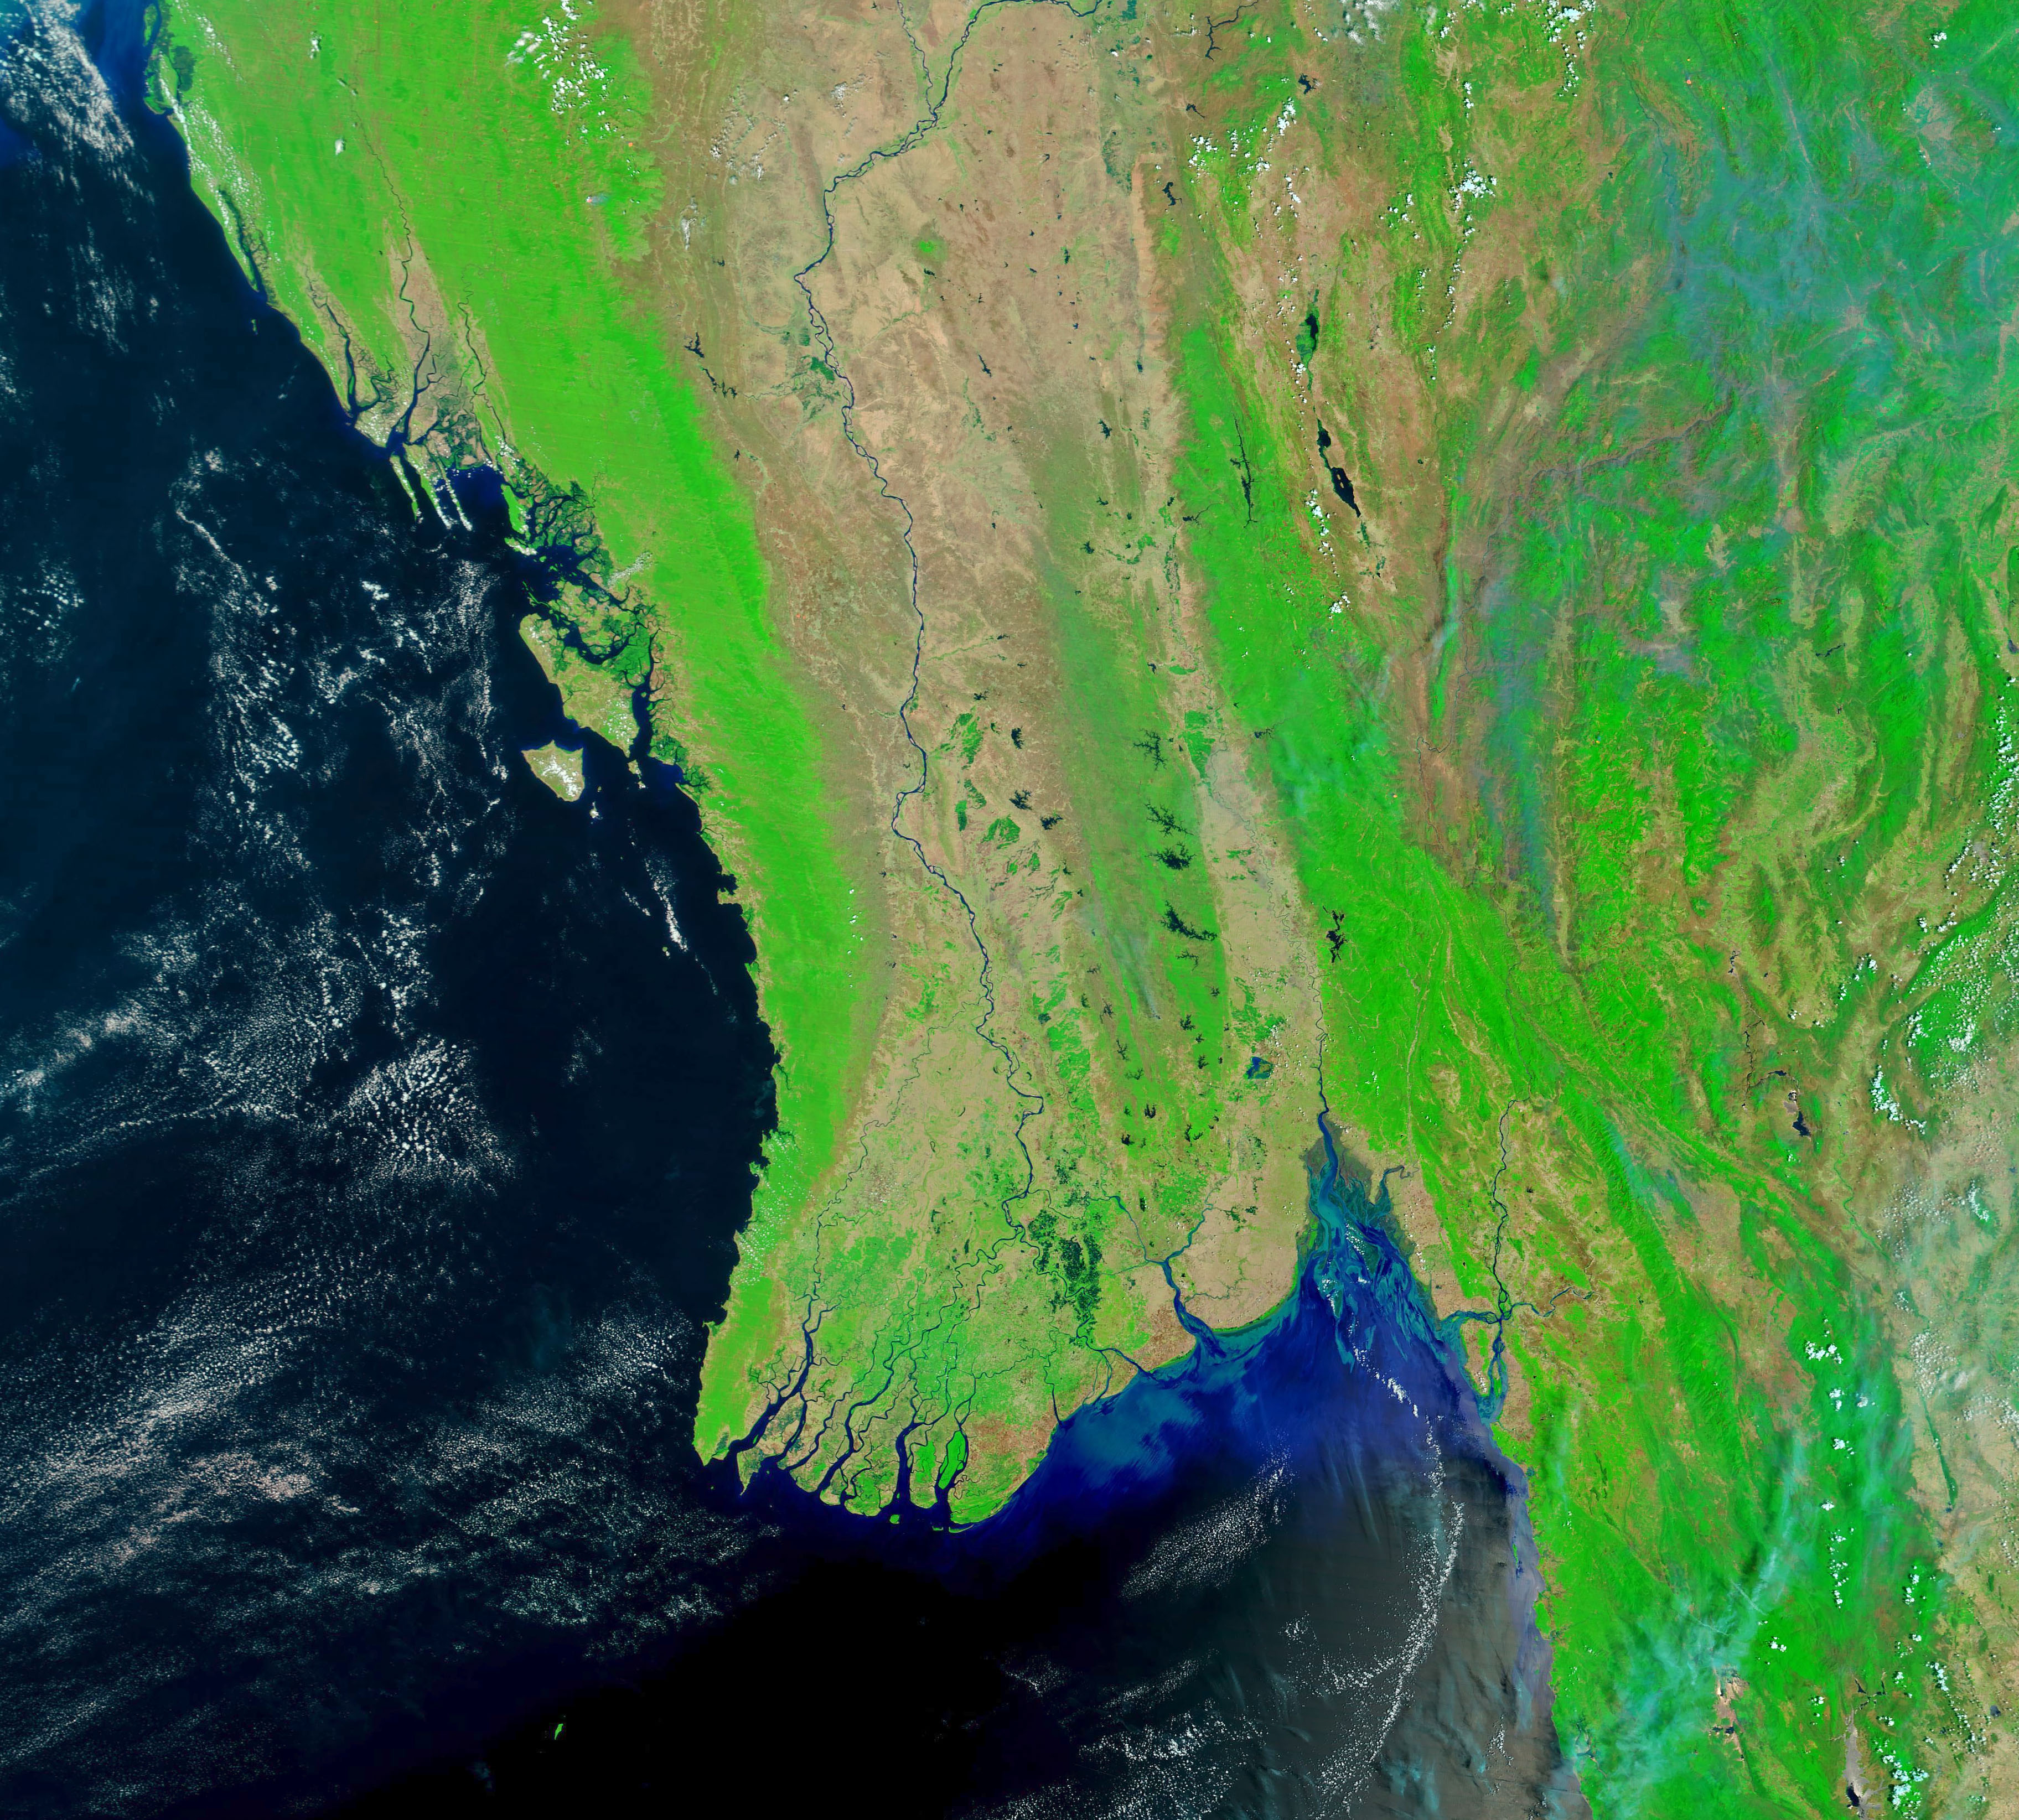 Heavy Monsoon Rains Flood South Asia - related image preview